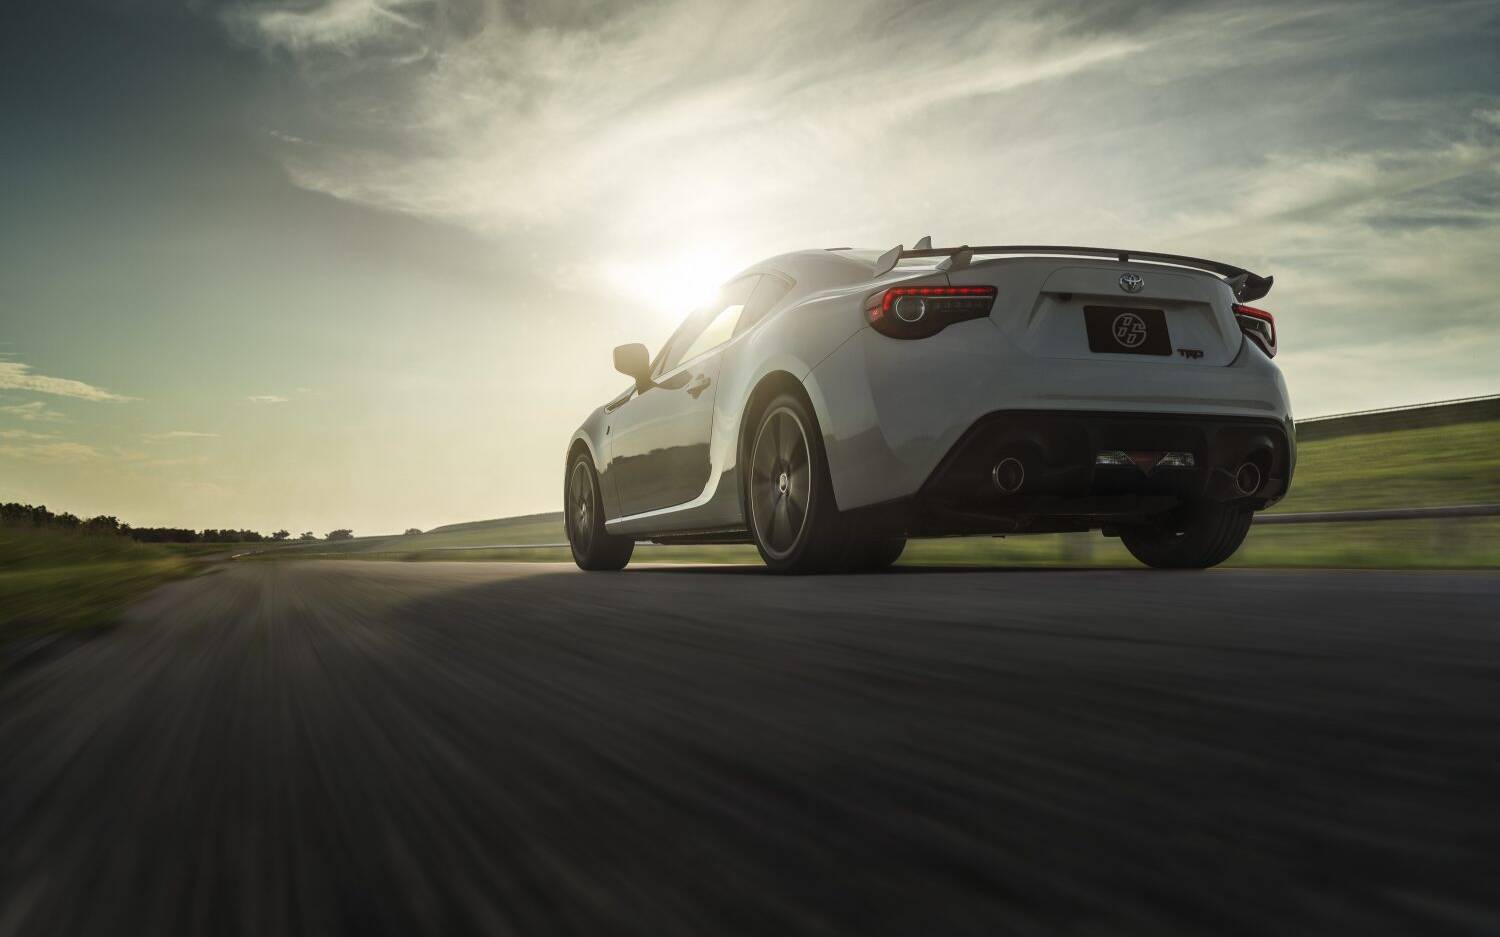 Next Toyota 86 Reportedly Delayed As CEO Doesn't Want A BRZ Clone